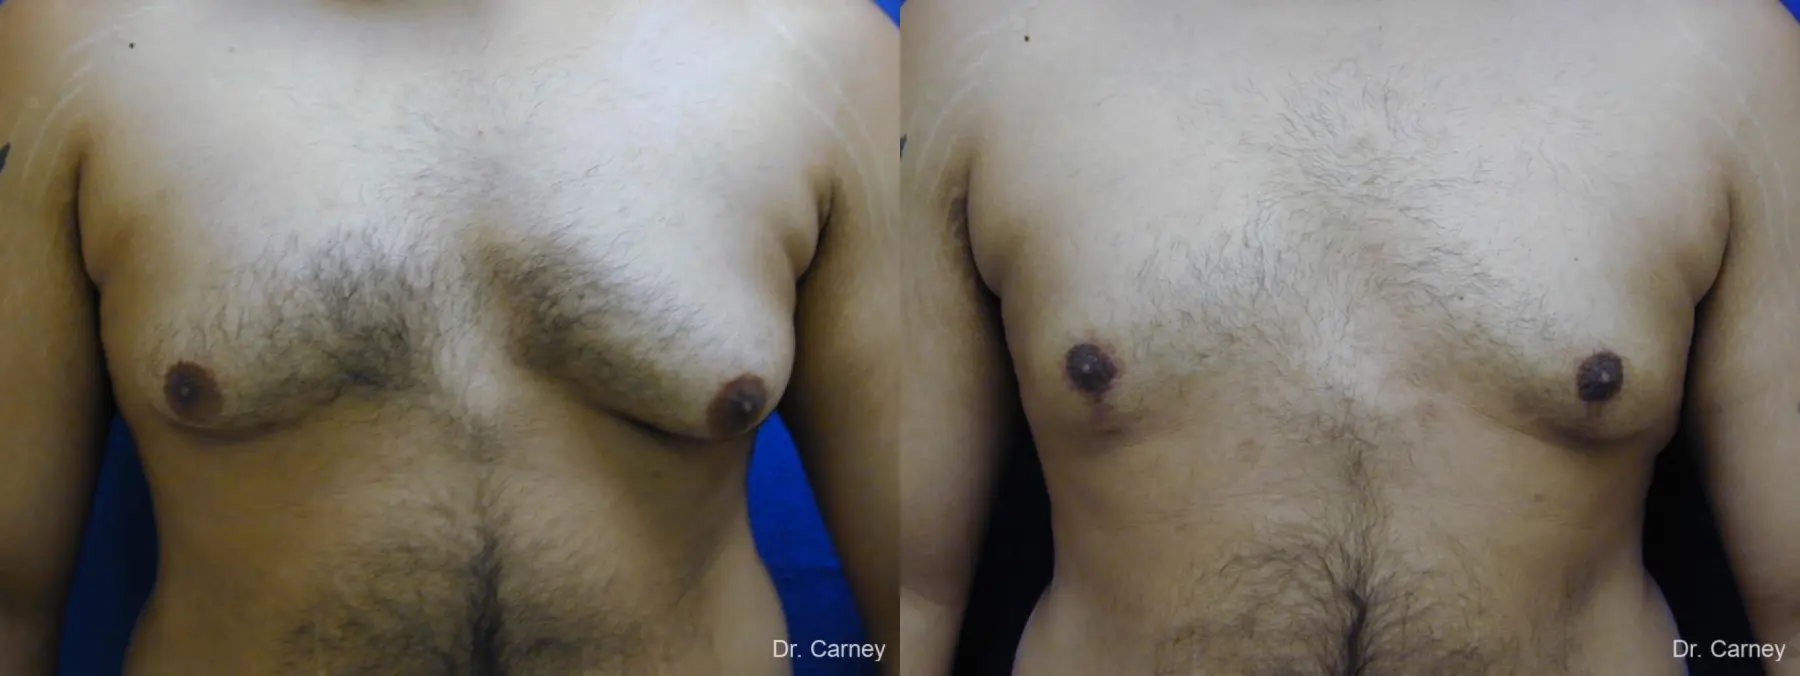 Virginia Beach Gynecomastia 1255 - Before and After 4